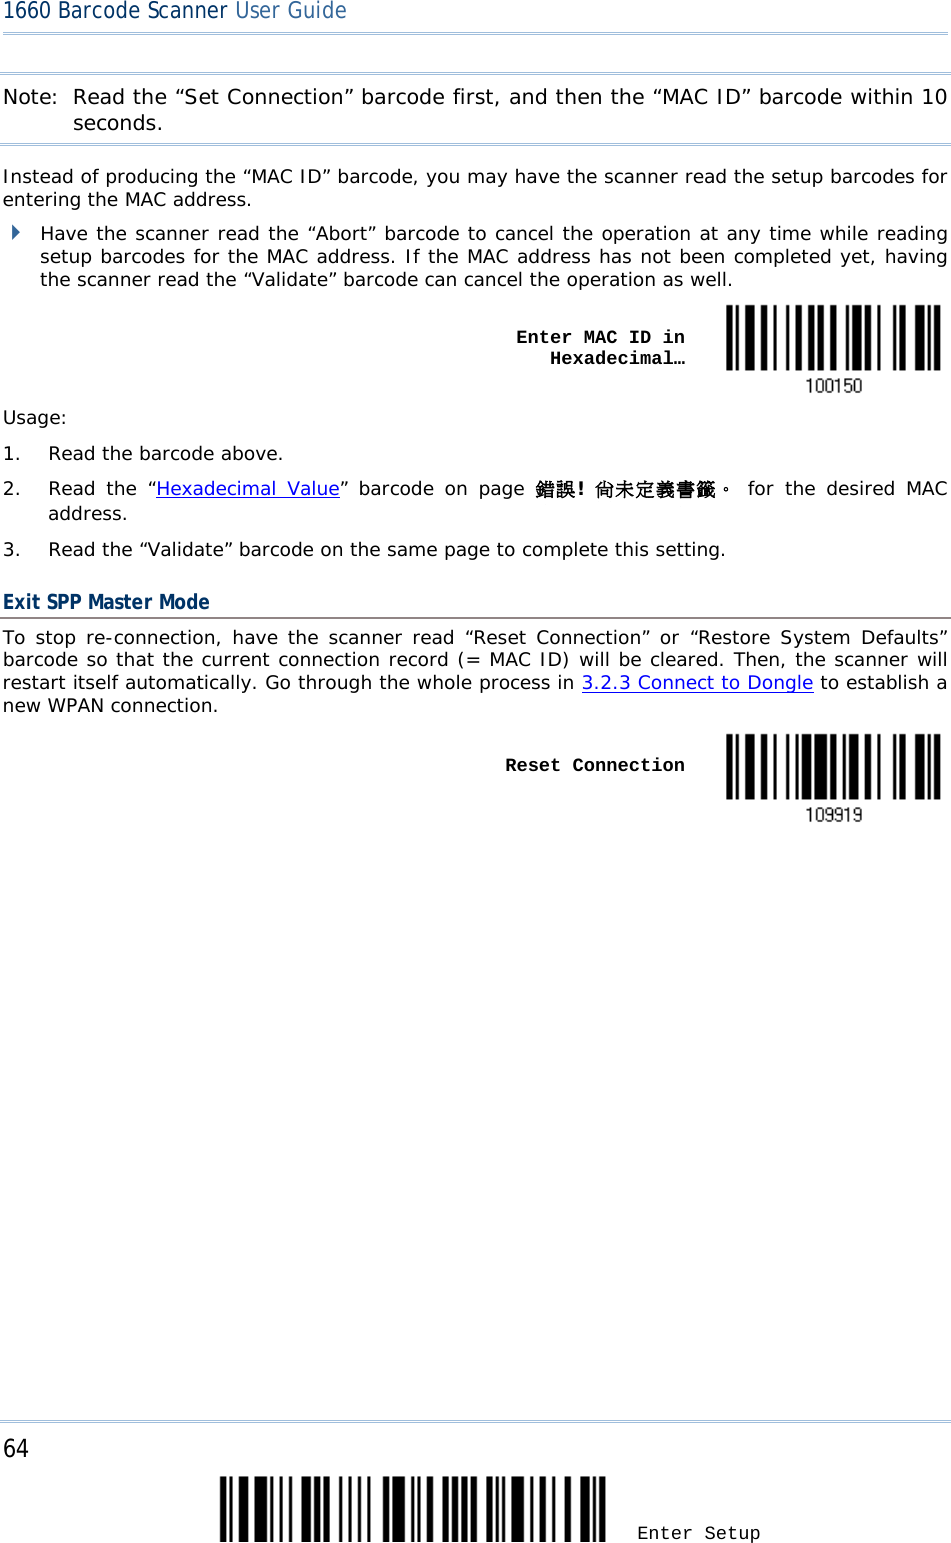 64 Enter Setup 1660 Barcode Scanner User Guide  Note: Read the “Set Connection” barcode first, and then the “MAC ID” barcode within 10 seconds. Instead of producing the “MAC ID” barcode, you may have the scanner read the setup barcodes for entering the MAC address.  Have the scanner read the “Abort” barcode to cancel the operation at any time while reading setup barcodes for the MAC address. If the MAC address has not been completed yet, having the scanner read the “Validate” barcode can cancel the operation as well.      Enter MAC ID in Hexadecimal…  Usage:  1. Read the barcode above. 2. Read the  “Hexadecimal Value”  barcode on page 錯誤! 尚未定義書籤。 for the desired MAC address. 3. Read the “Validate” barcode on the same page to complete this setting. Exit SPP Master Mode To stop re-connection, have the scanner read “Reset Connection” or “Restore System Defaults” barcode so that the current connection record (= MAC ID) will be cleared. Then, the scanner will restart itself automatically. Go through the whole process in 3.2.3 Connect to Dongle to establish a new WPAN connection.    Reset Connection                            